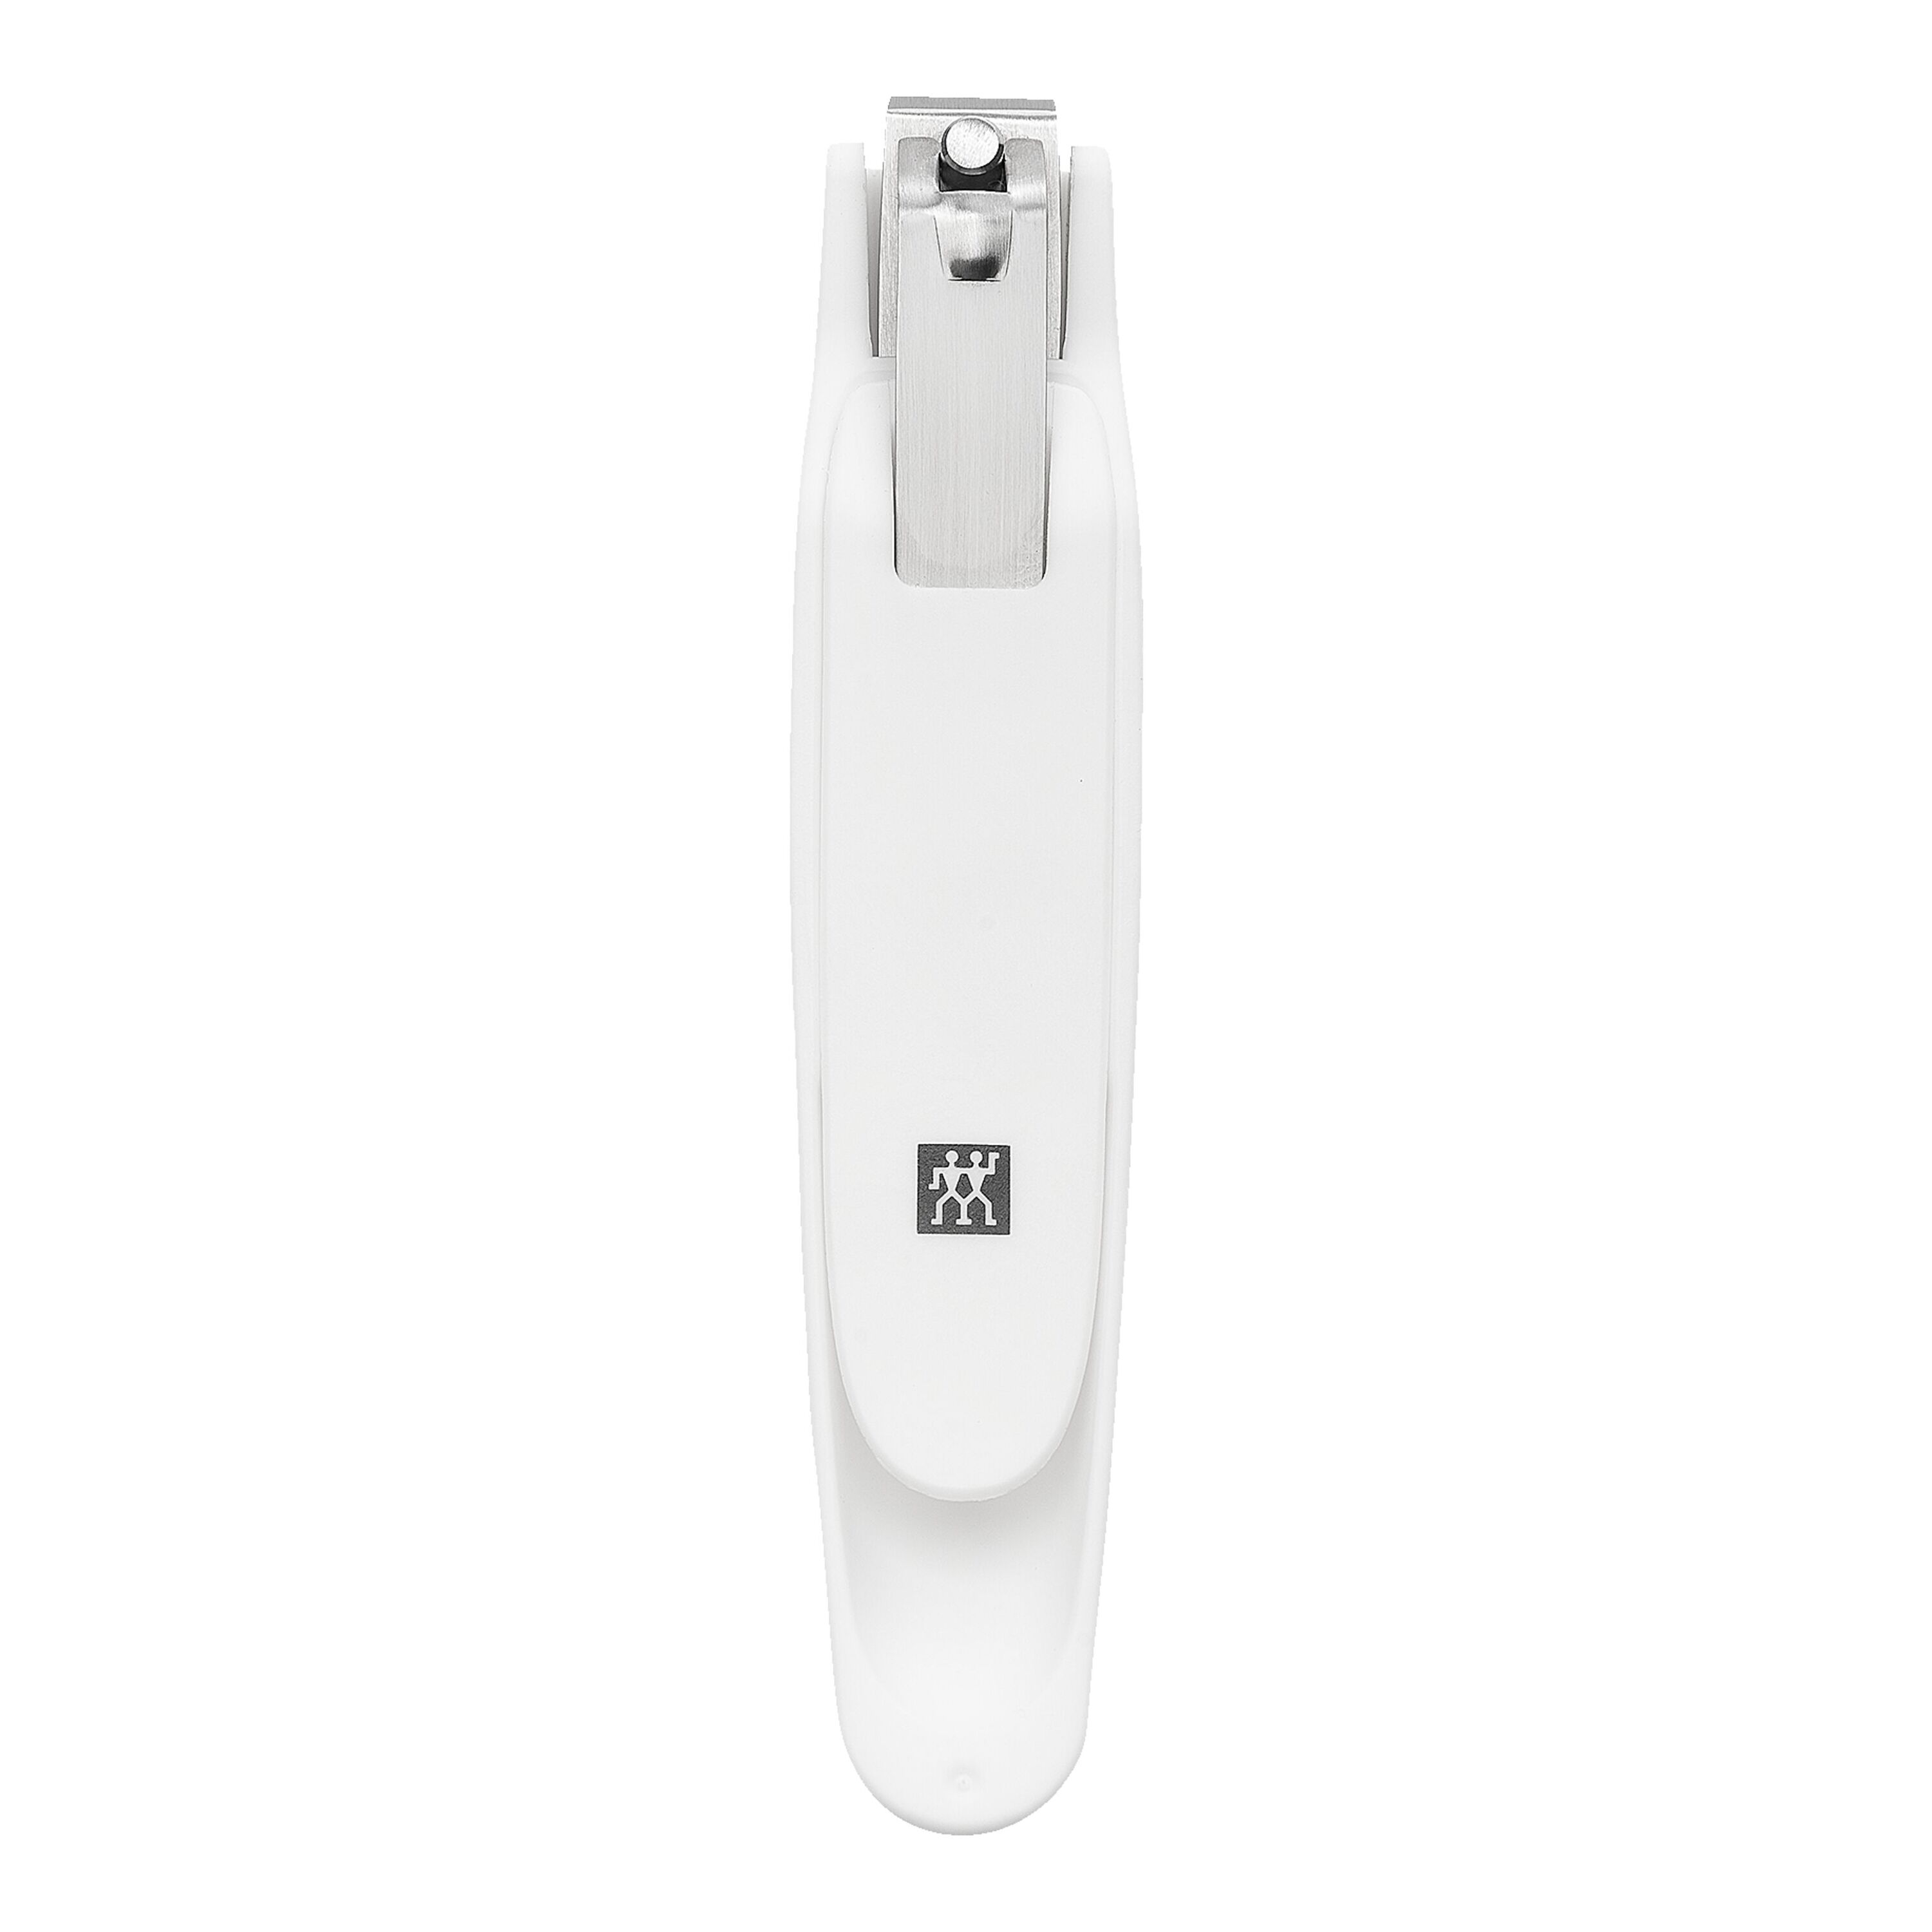 Twin S Ultra Slim Nail Clipper Gold Editionby Zwilling J.A. Henckels at  Swiss Knife Shop